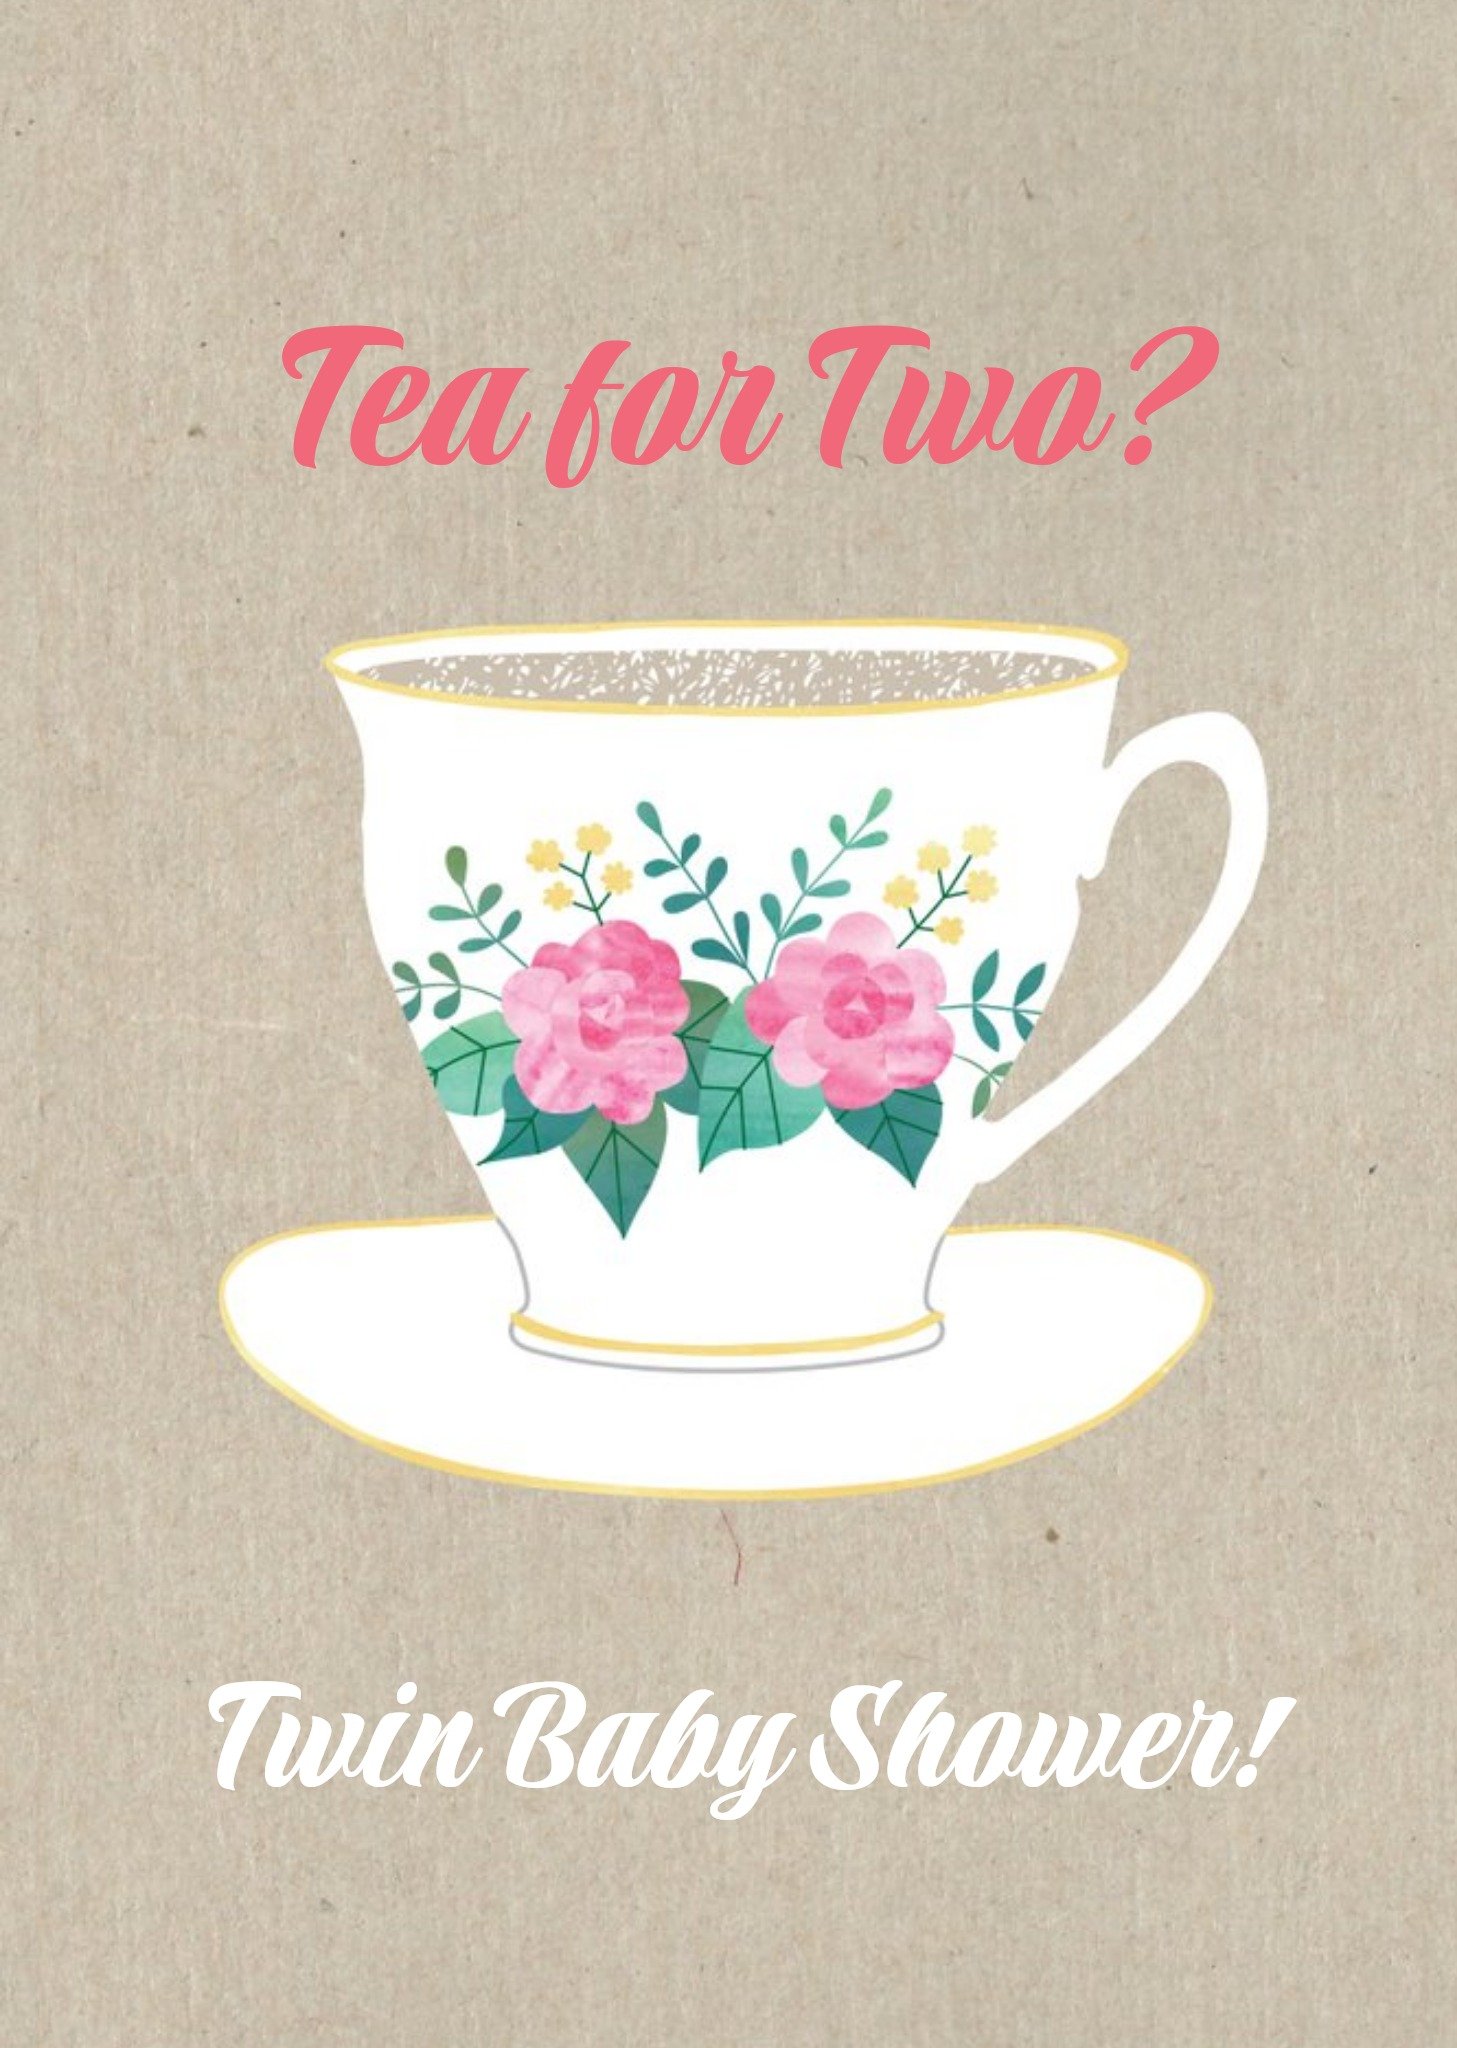 Moonpig Personalised Twin Baby Shower Card Tea For Two?, Standard